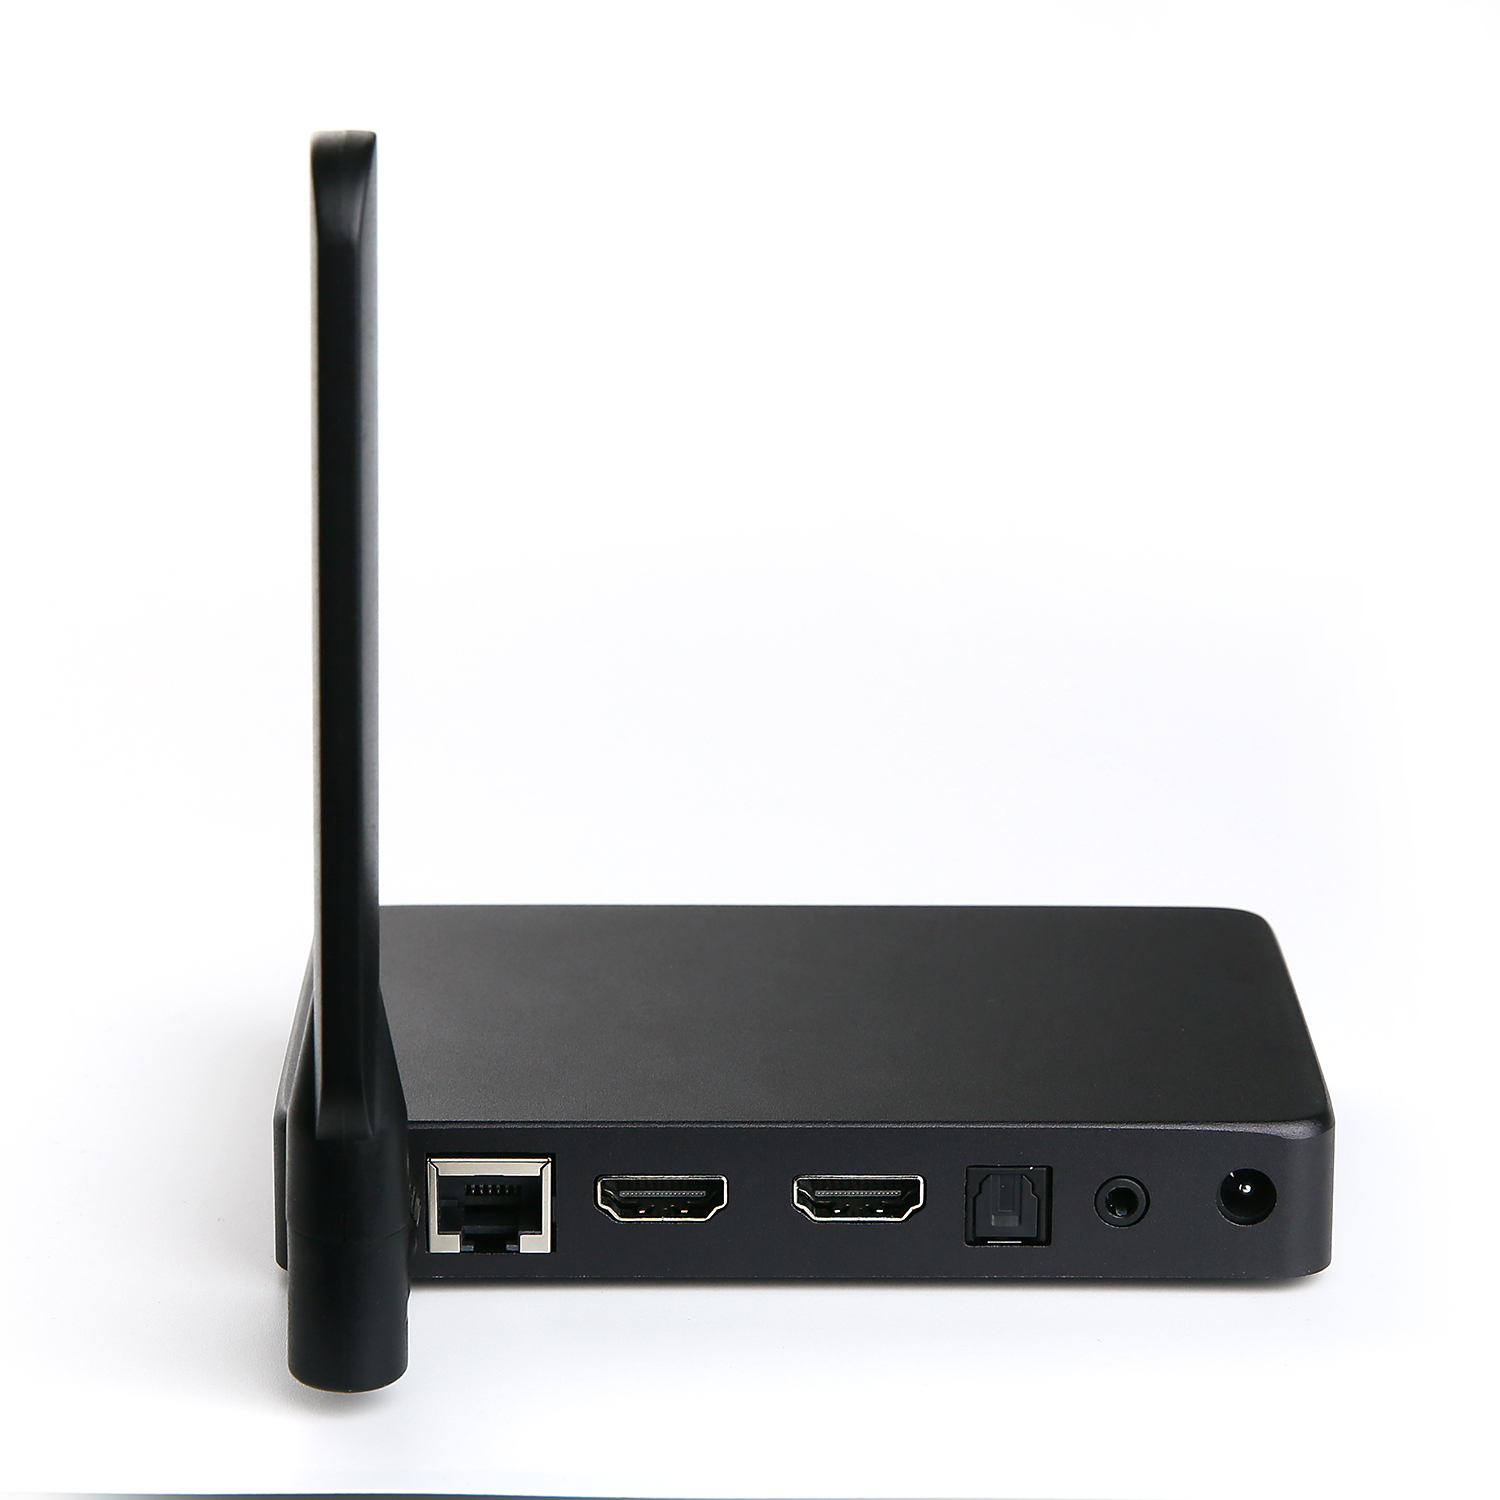 Bluetooth 4.0 Android Smart TV Box, Best Android TV Box HDMI